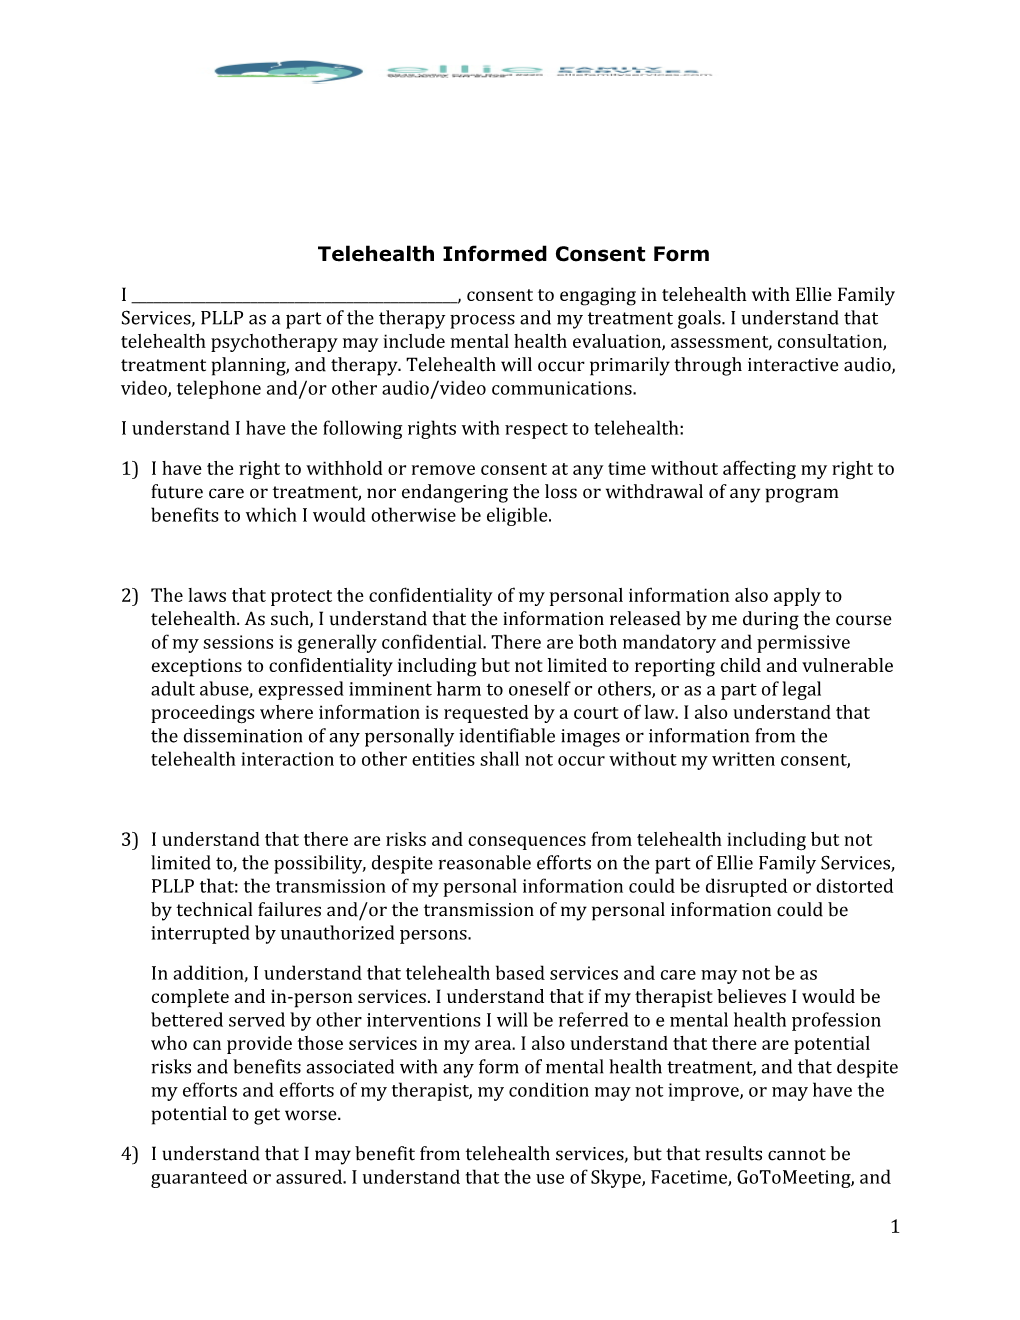 Telehealth Informed Consent Form